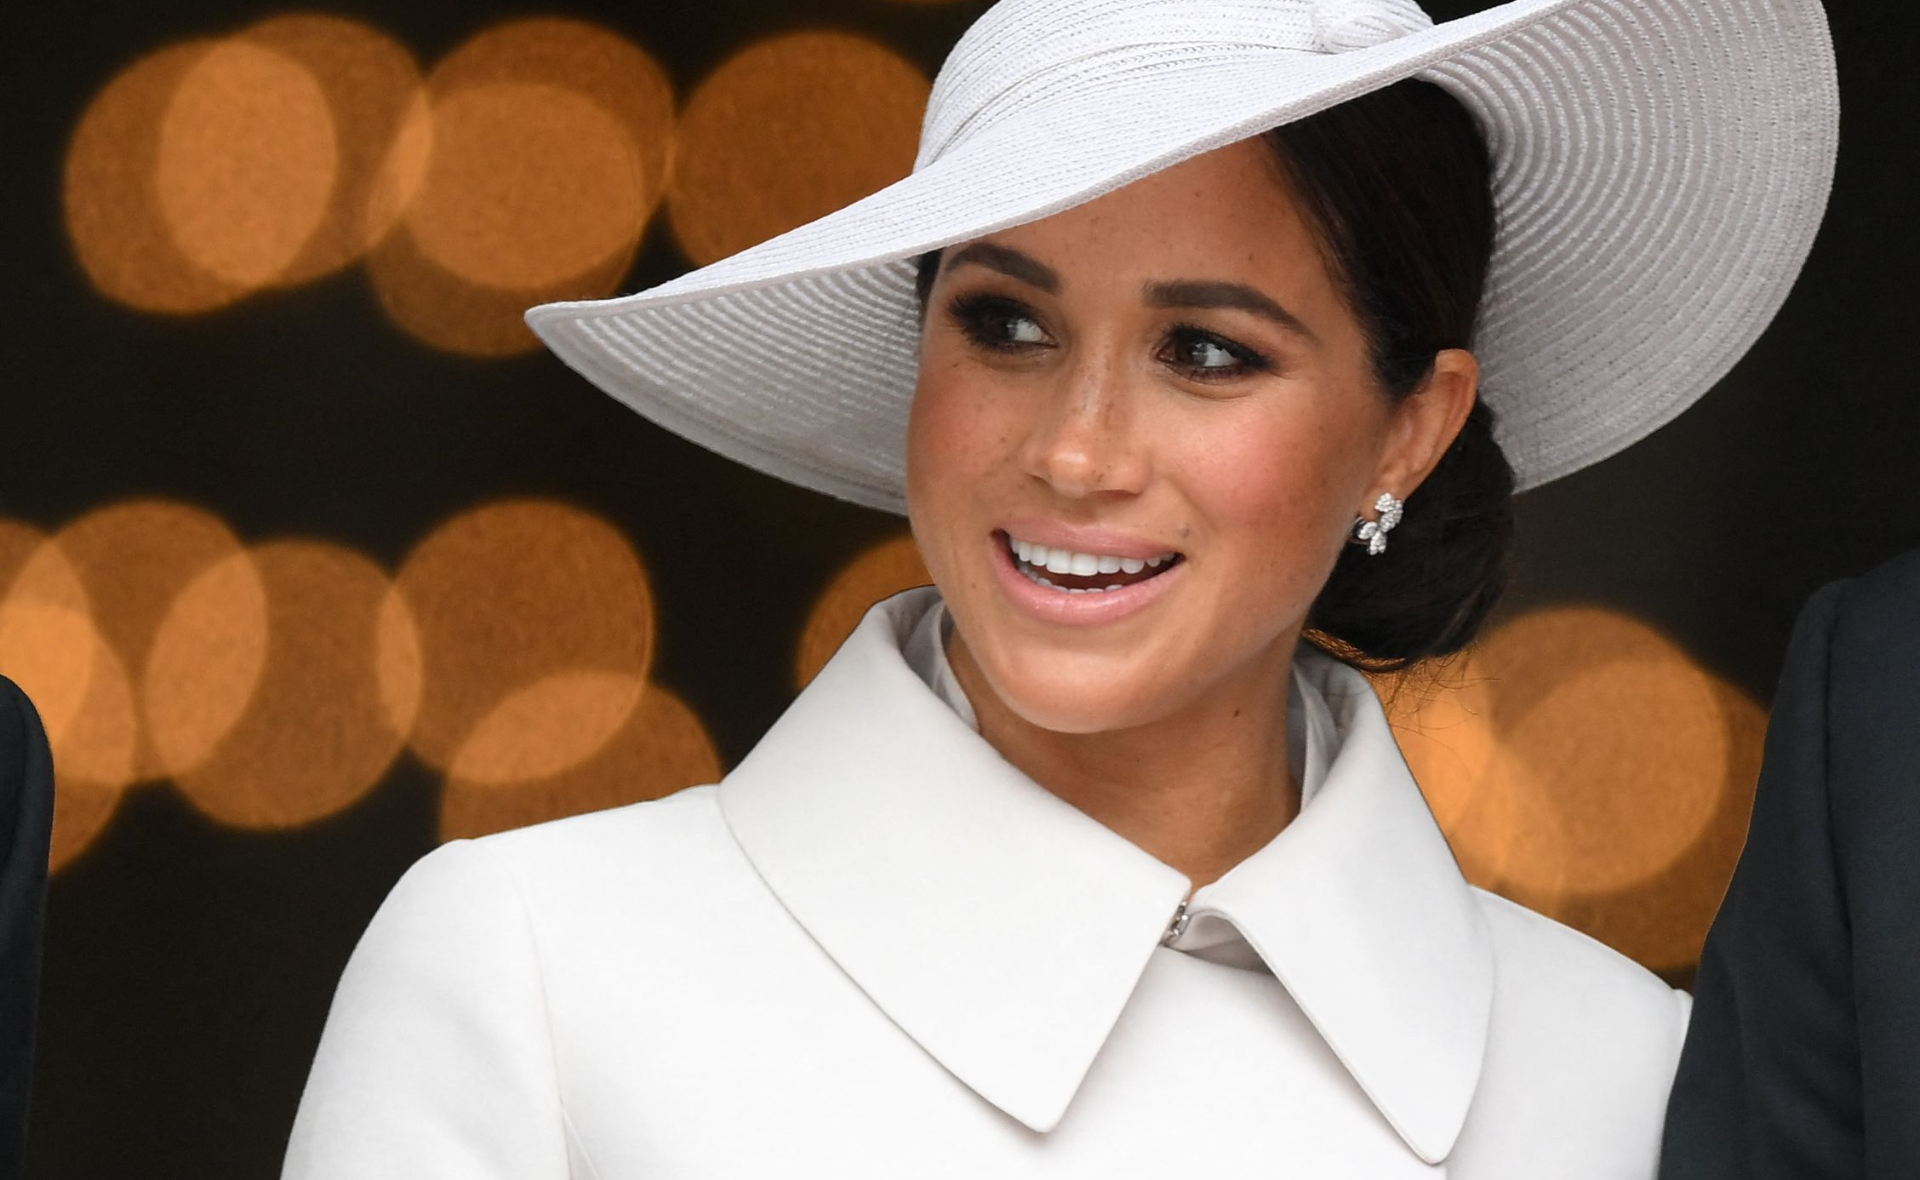 Meghan Markle makes a rare public appearance in wake of coronation speculation